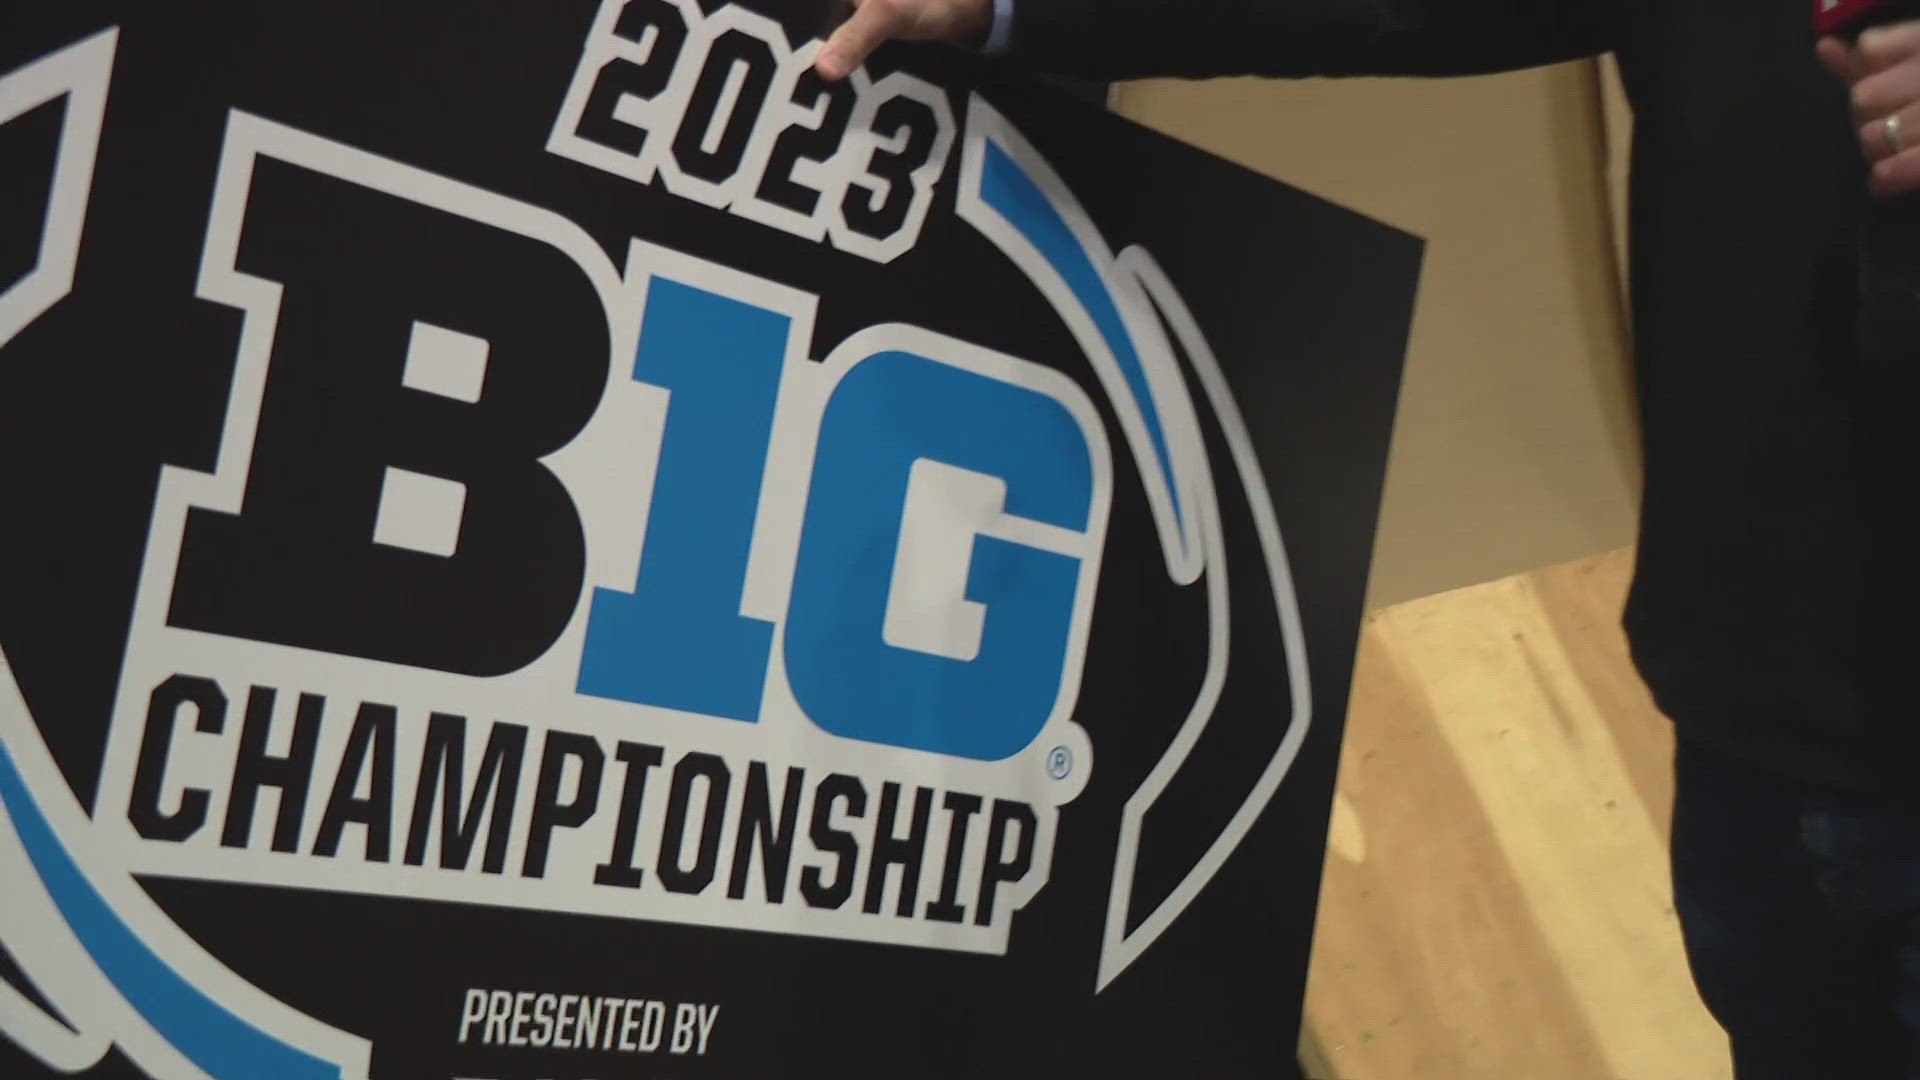 The Big Ten Championship is coming up this Saturday with plenty of events like the Georgia Street Tailgate Party.